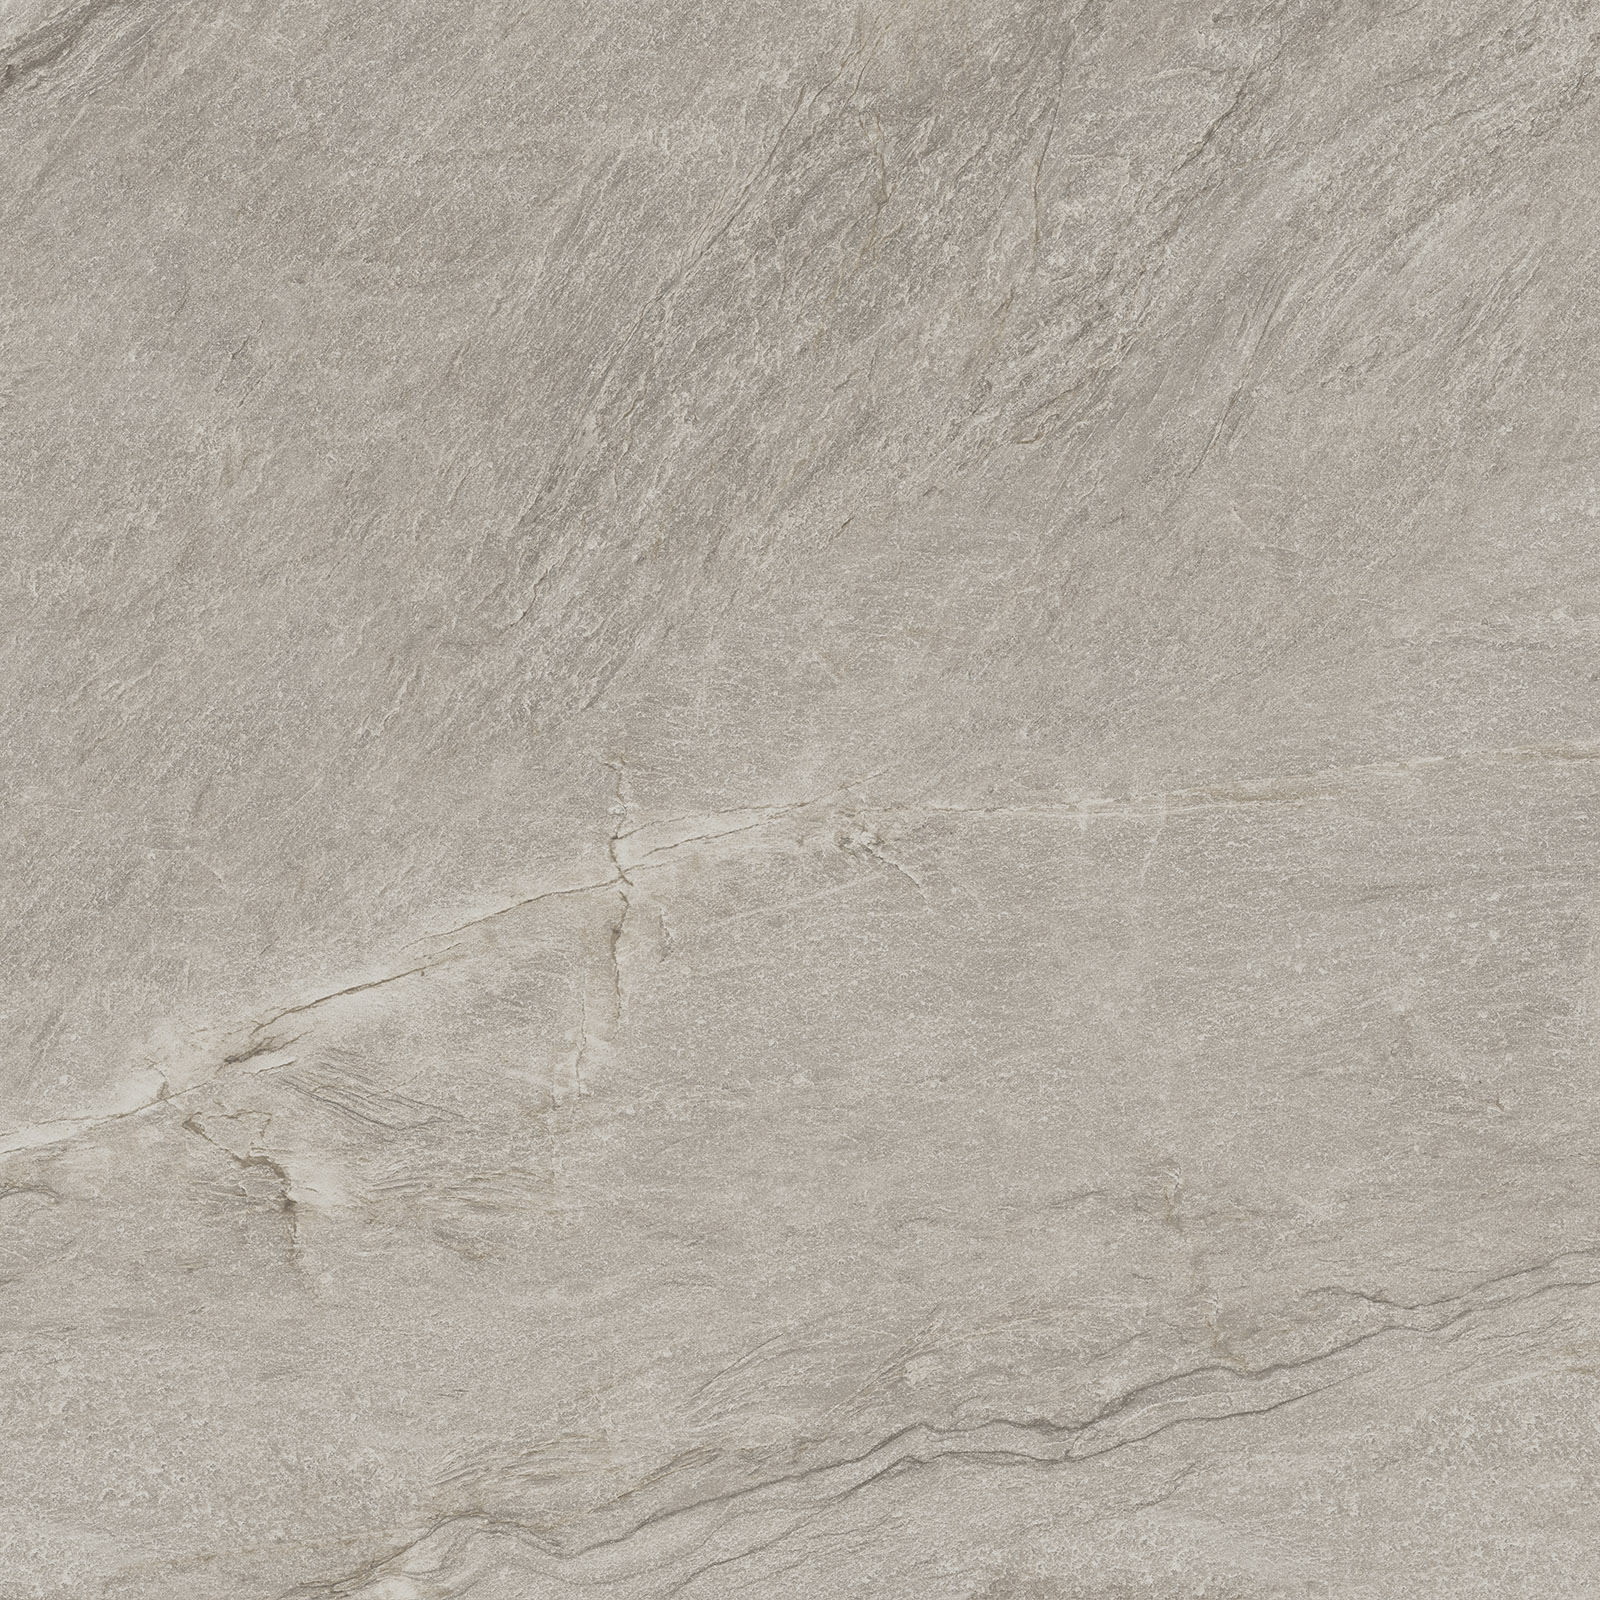 Imola Vibes Beige Scuro Natural Strutturato Matt 179571 120x120cm rectified 10mm - VIBES 120BS RM